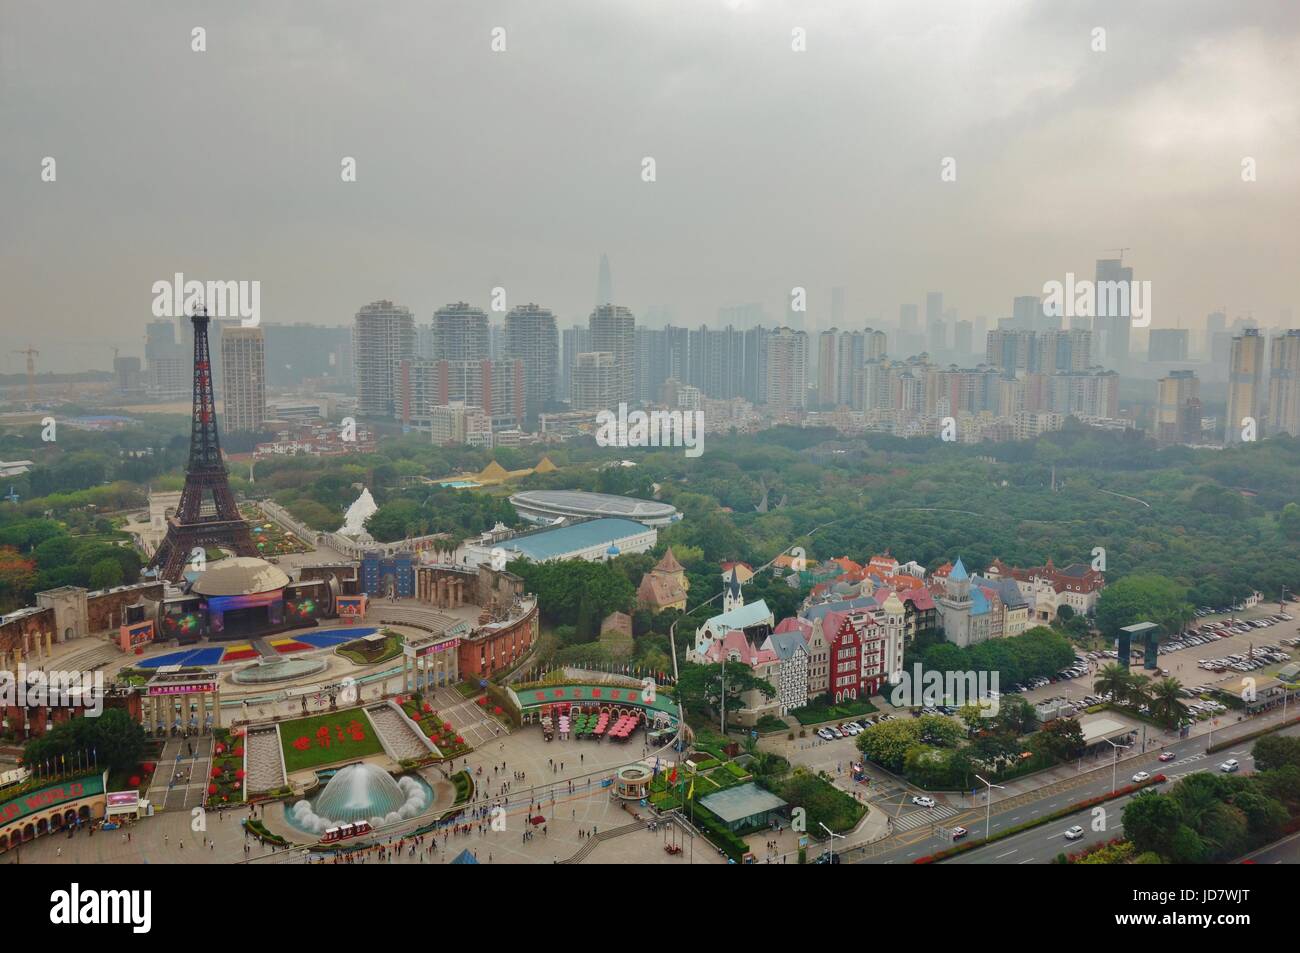 View of the Window of the World Theme Park located in Shenzhen, People's Republic of China. It includes reproductions of famous world monuments. Stock Photo